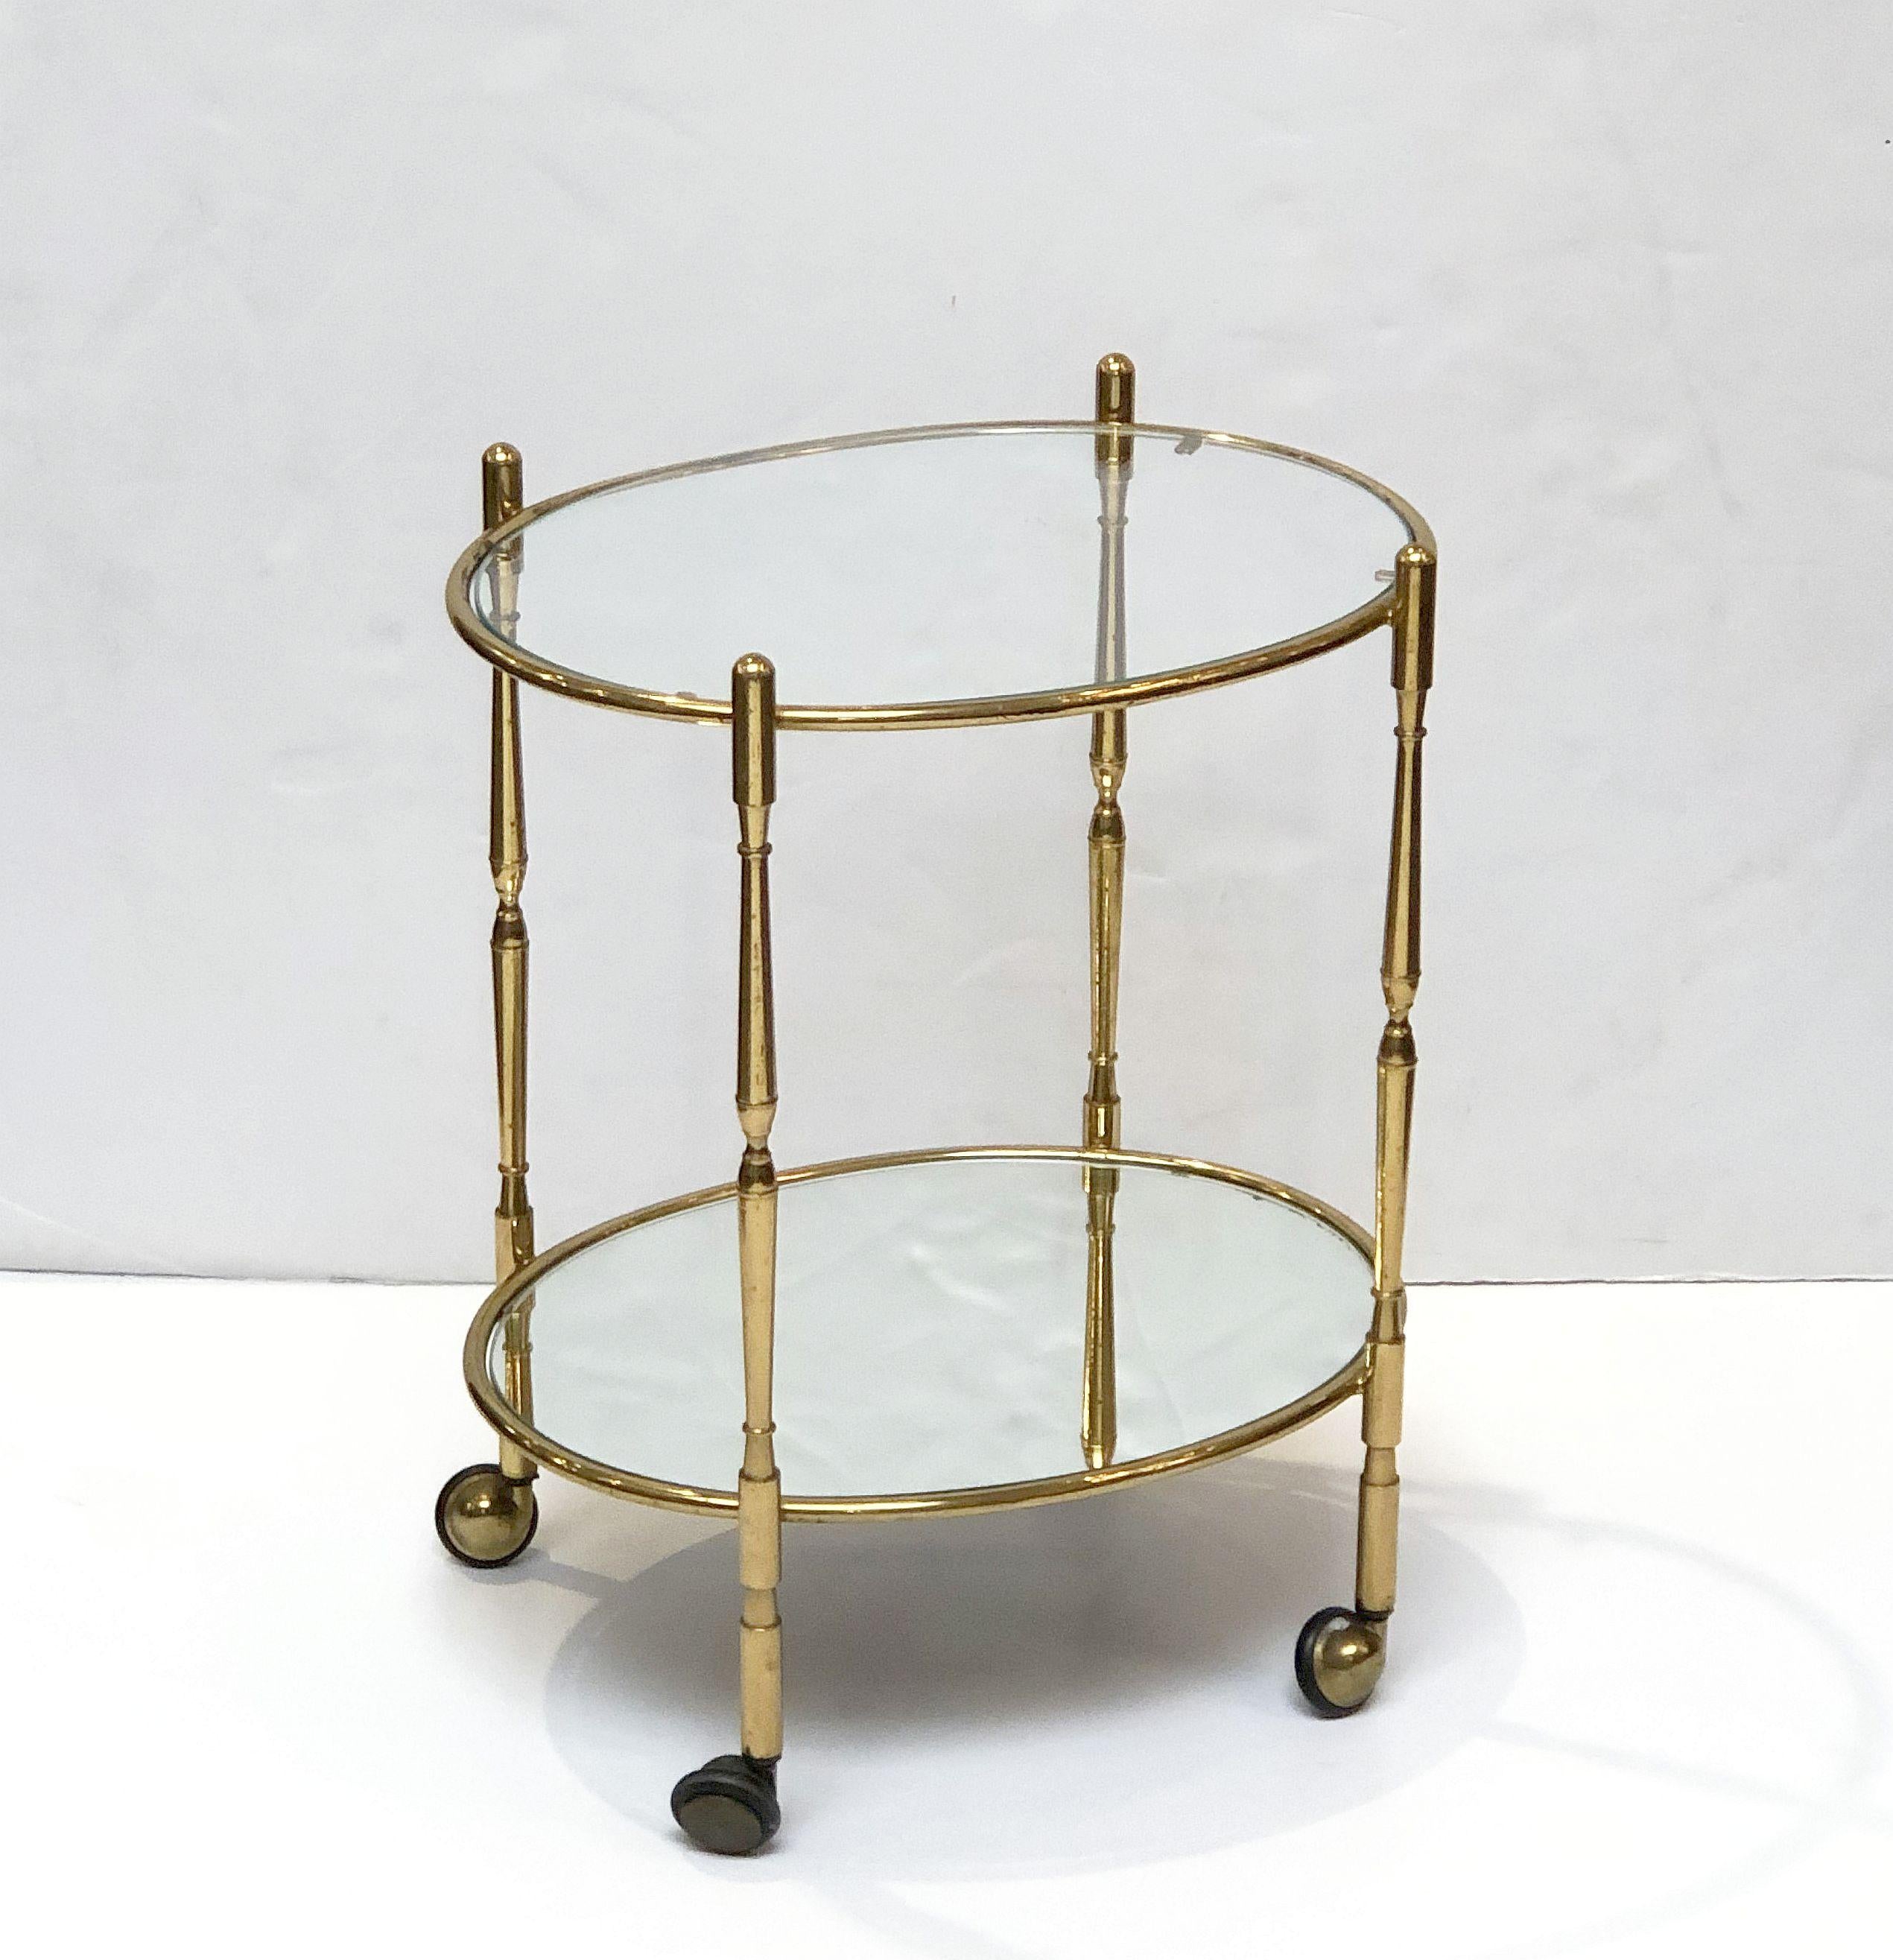 A vintage French oval bar cart table or drinks cart (serving trolley) in brass, with a top tier of glass and a bottom tier of mirrored glass, on rolling caster wheels. 

Perfect for use as a side or end table.